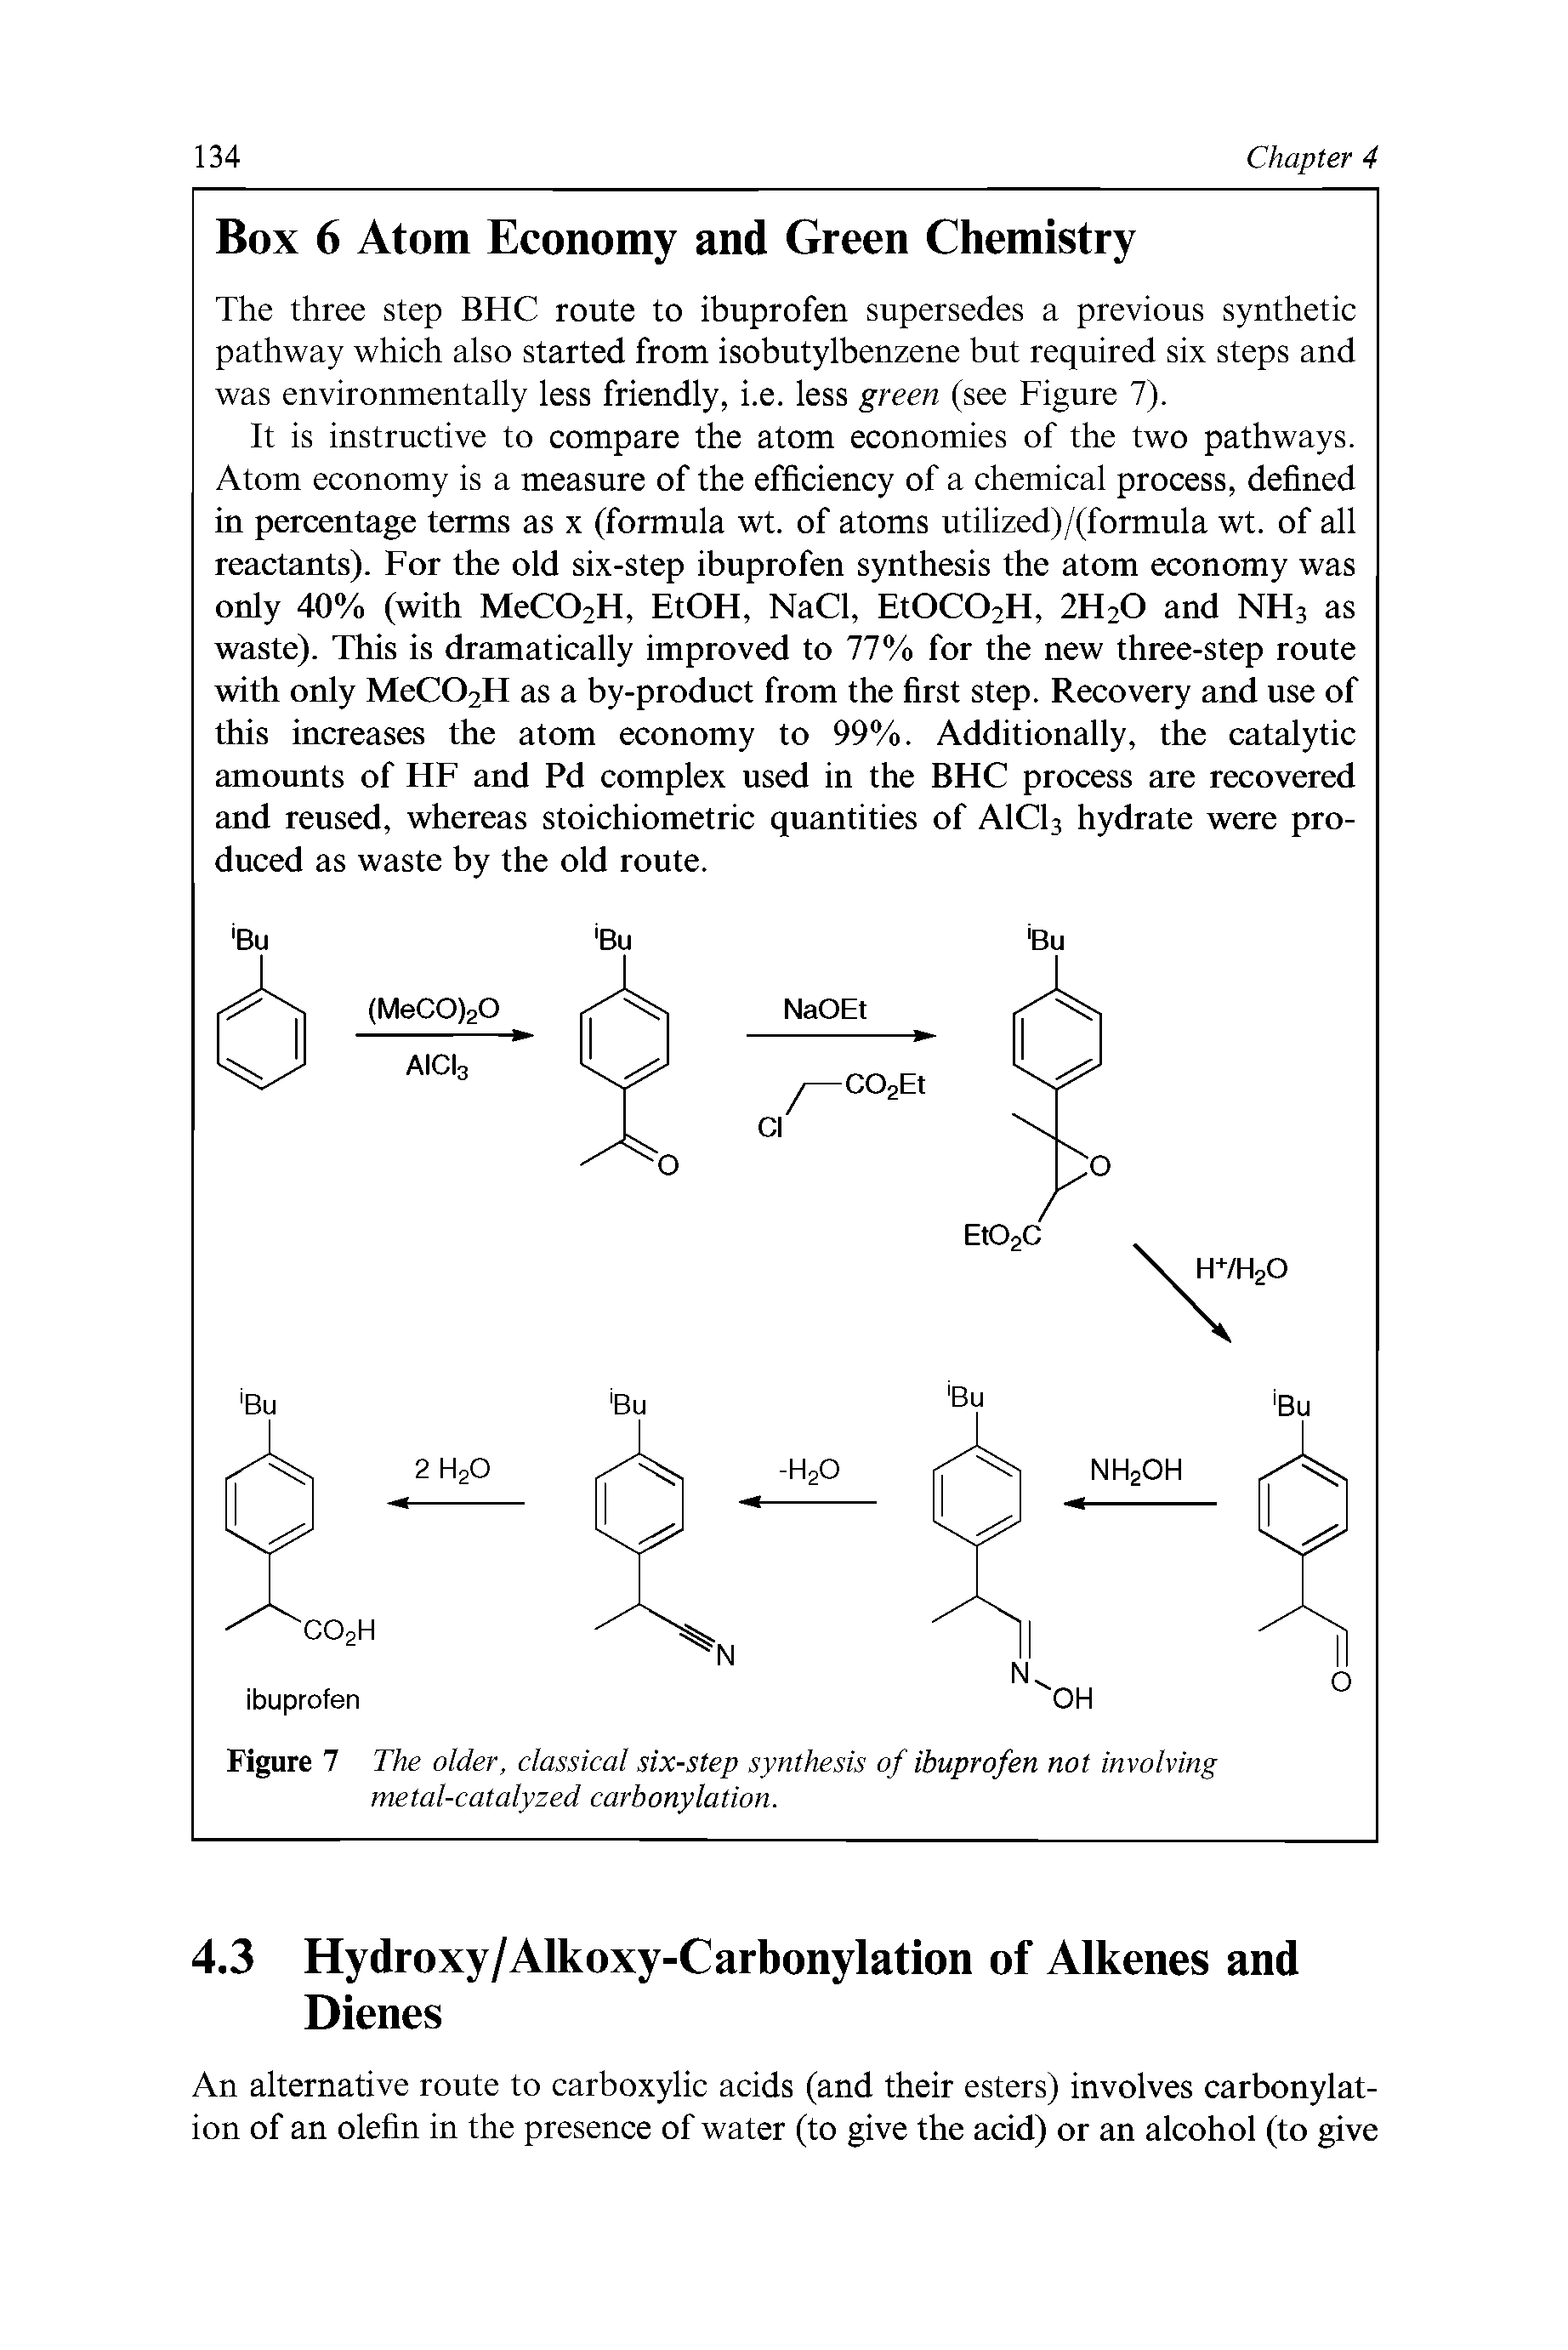 Figure 7 The older, classical six-step synthesis of ibuprofen not involving metal-catalyzed carbonylation.